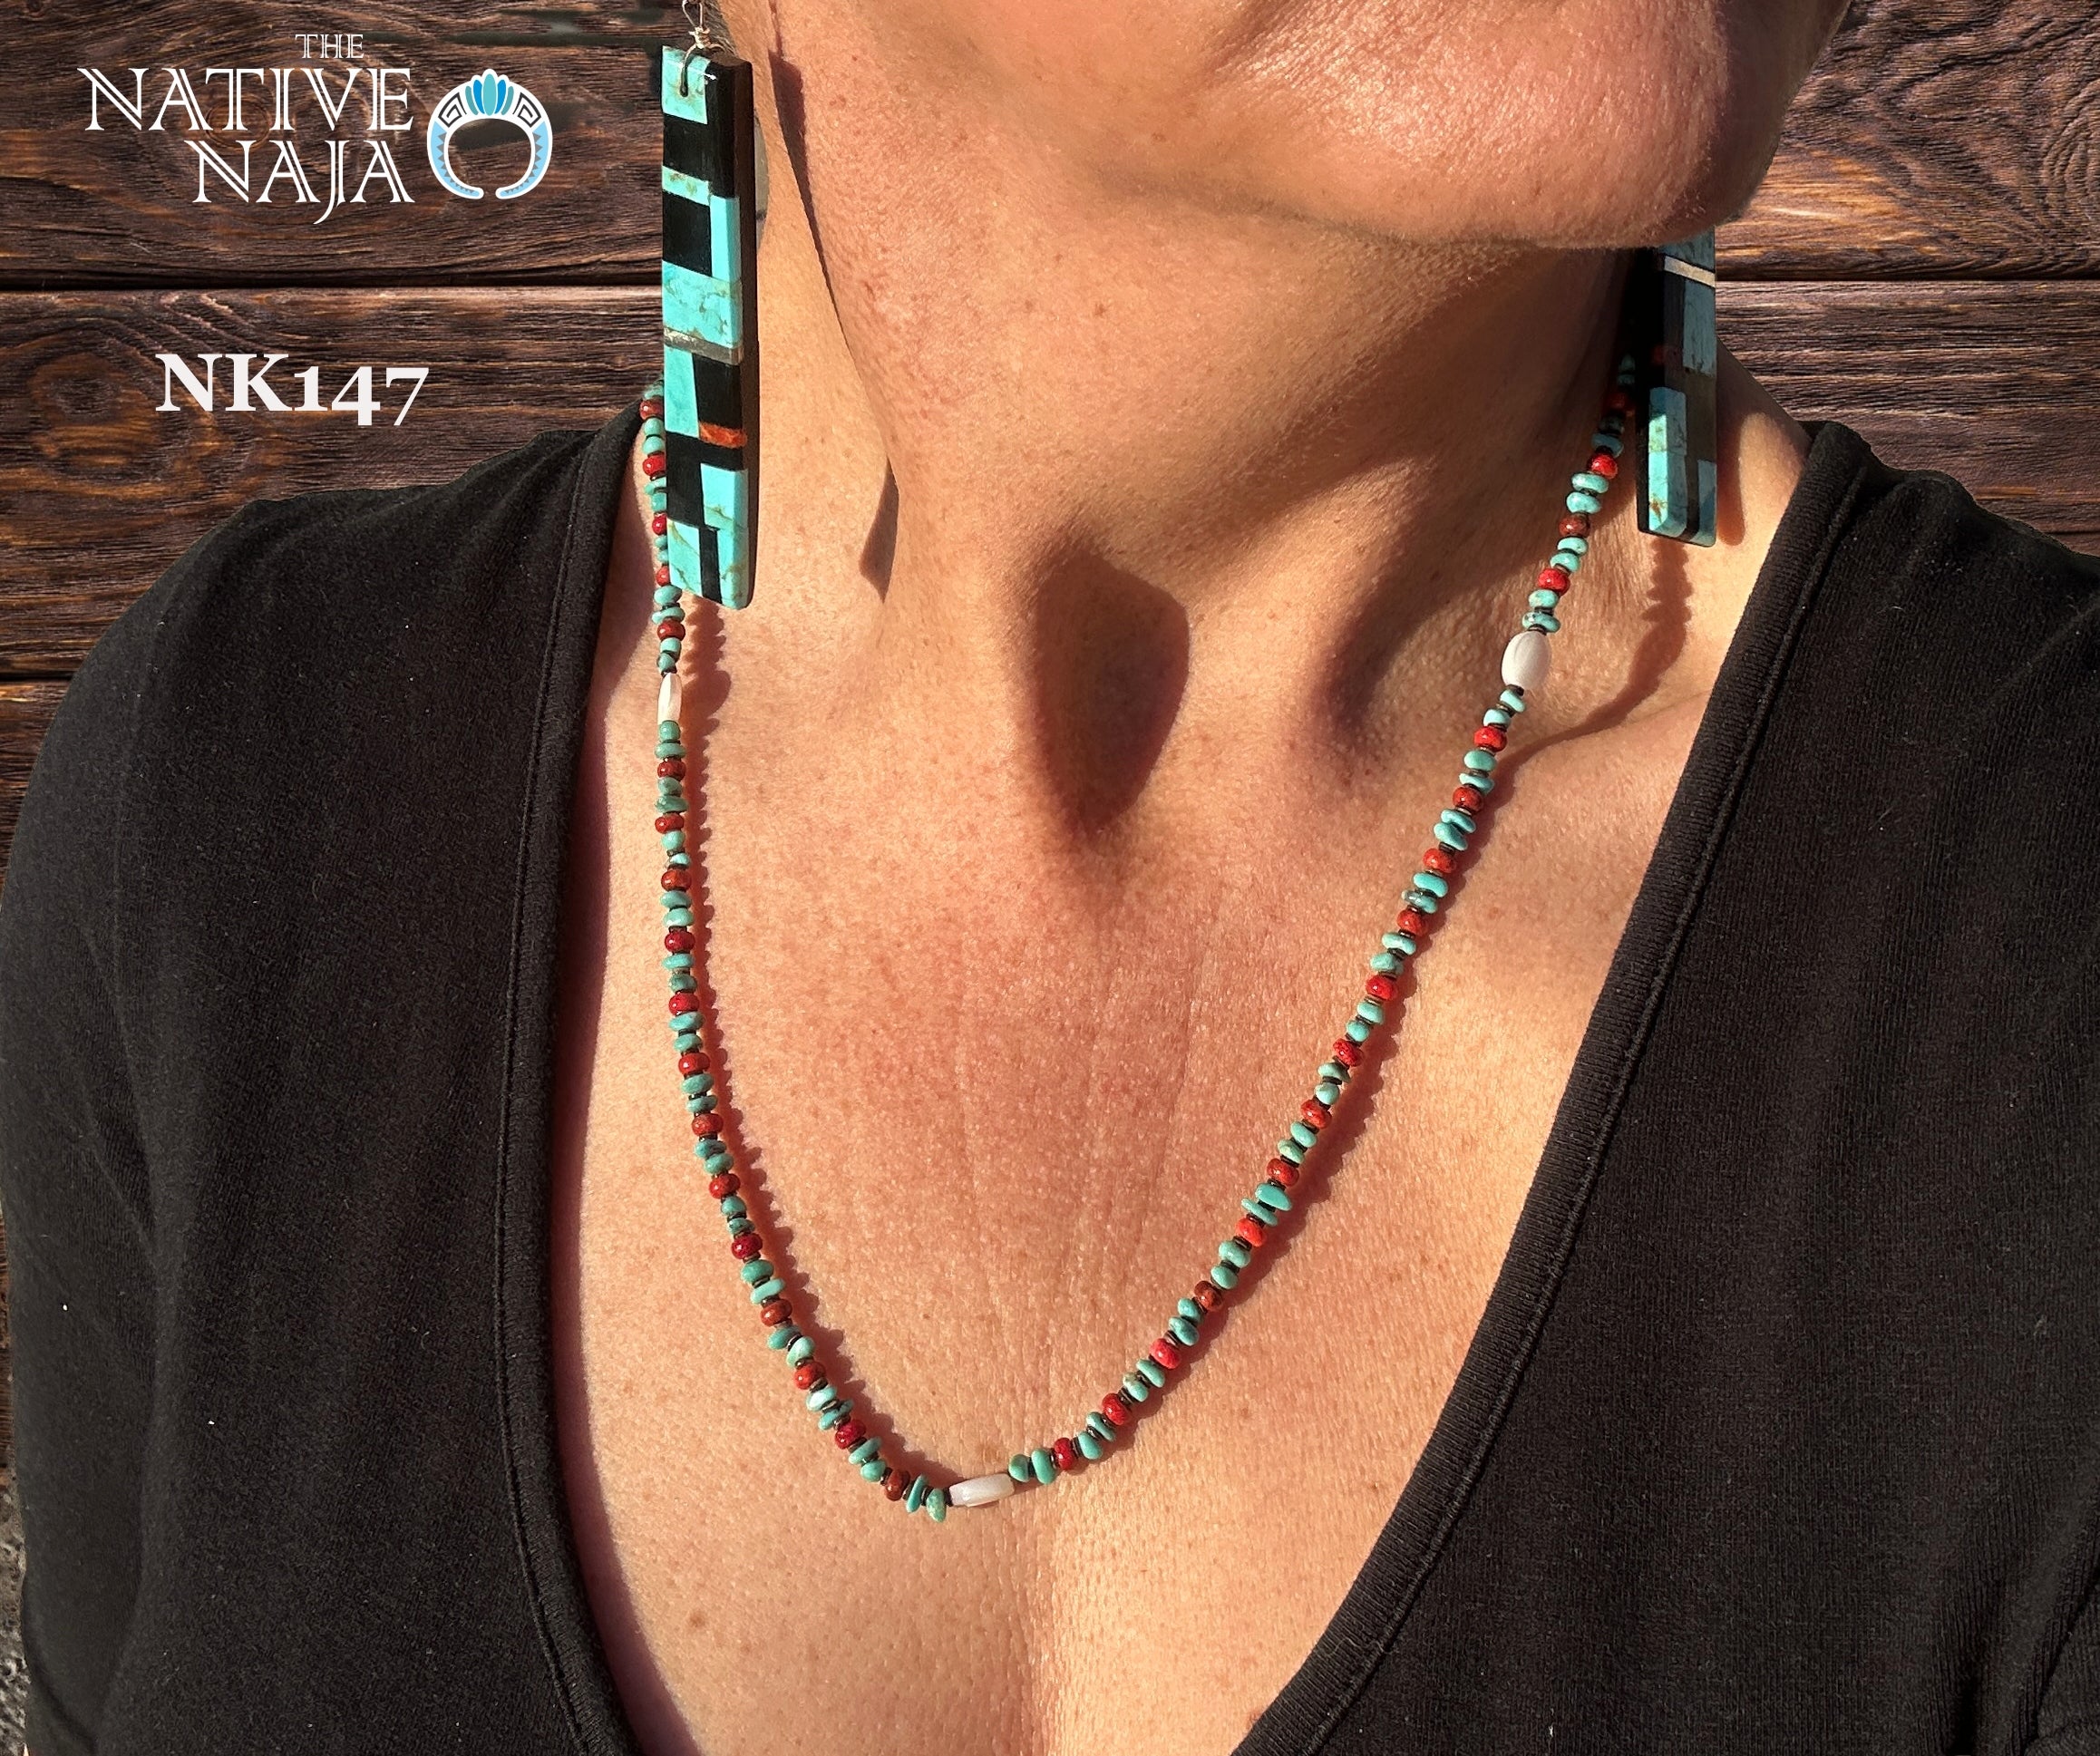 Navajo 23" Multi Stone Multi Color Turquoise, Coral, Mother of Pearl Necklace NK147